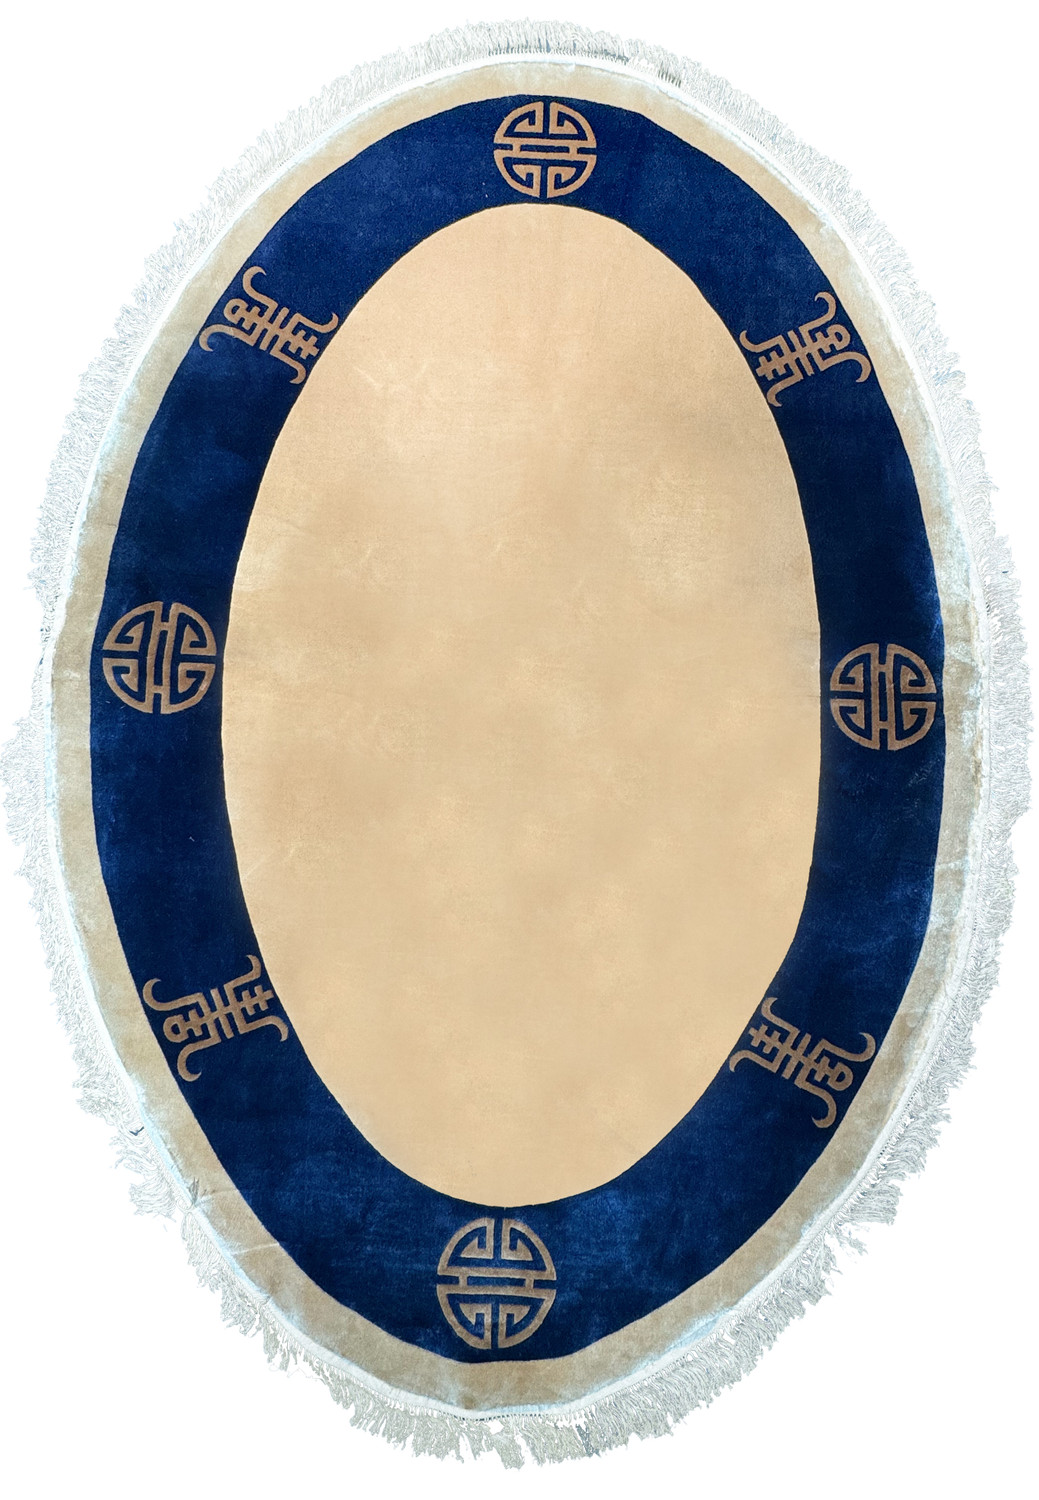 Luxurious 4x6 oval Art Deco silk rug with traditional Asian longevity symbols in deep blue and beige